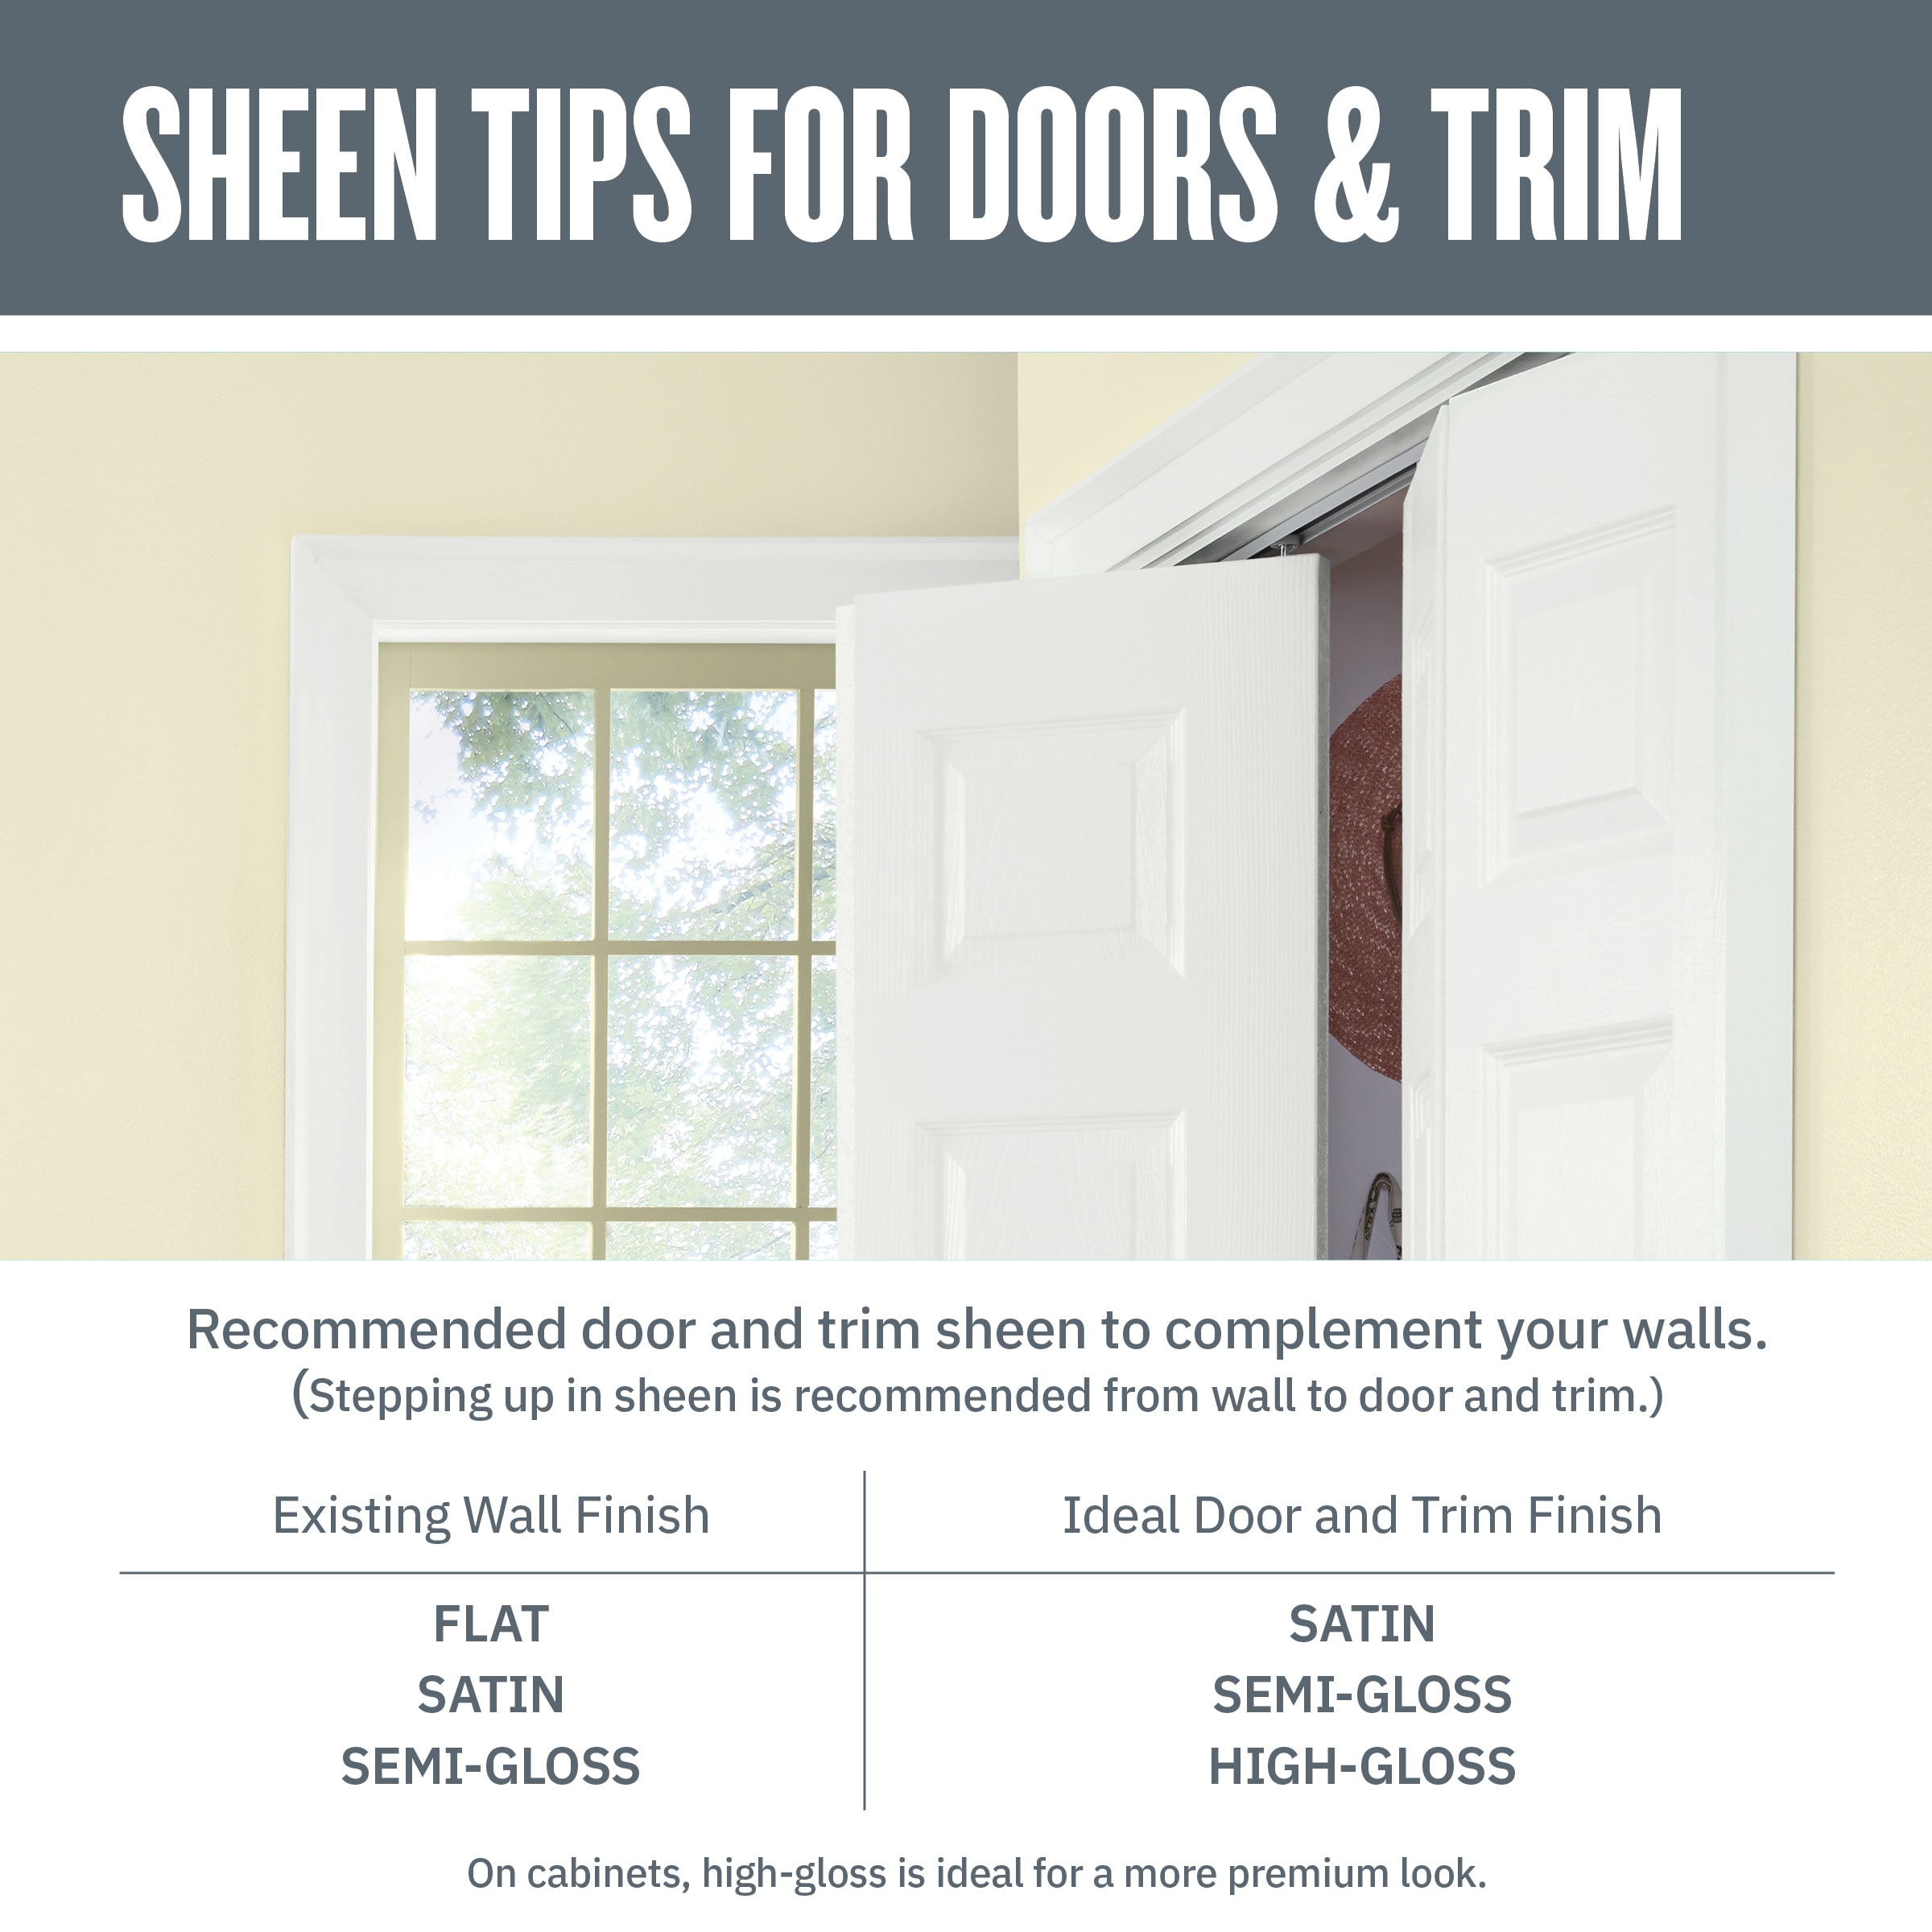 Why Choose Semi-Gloss or Satin for Trims?